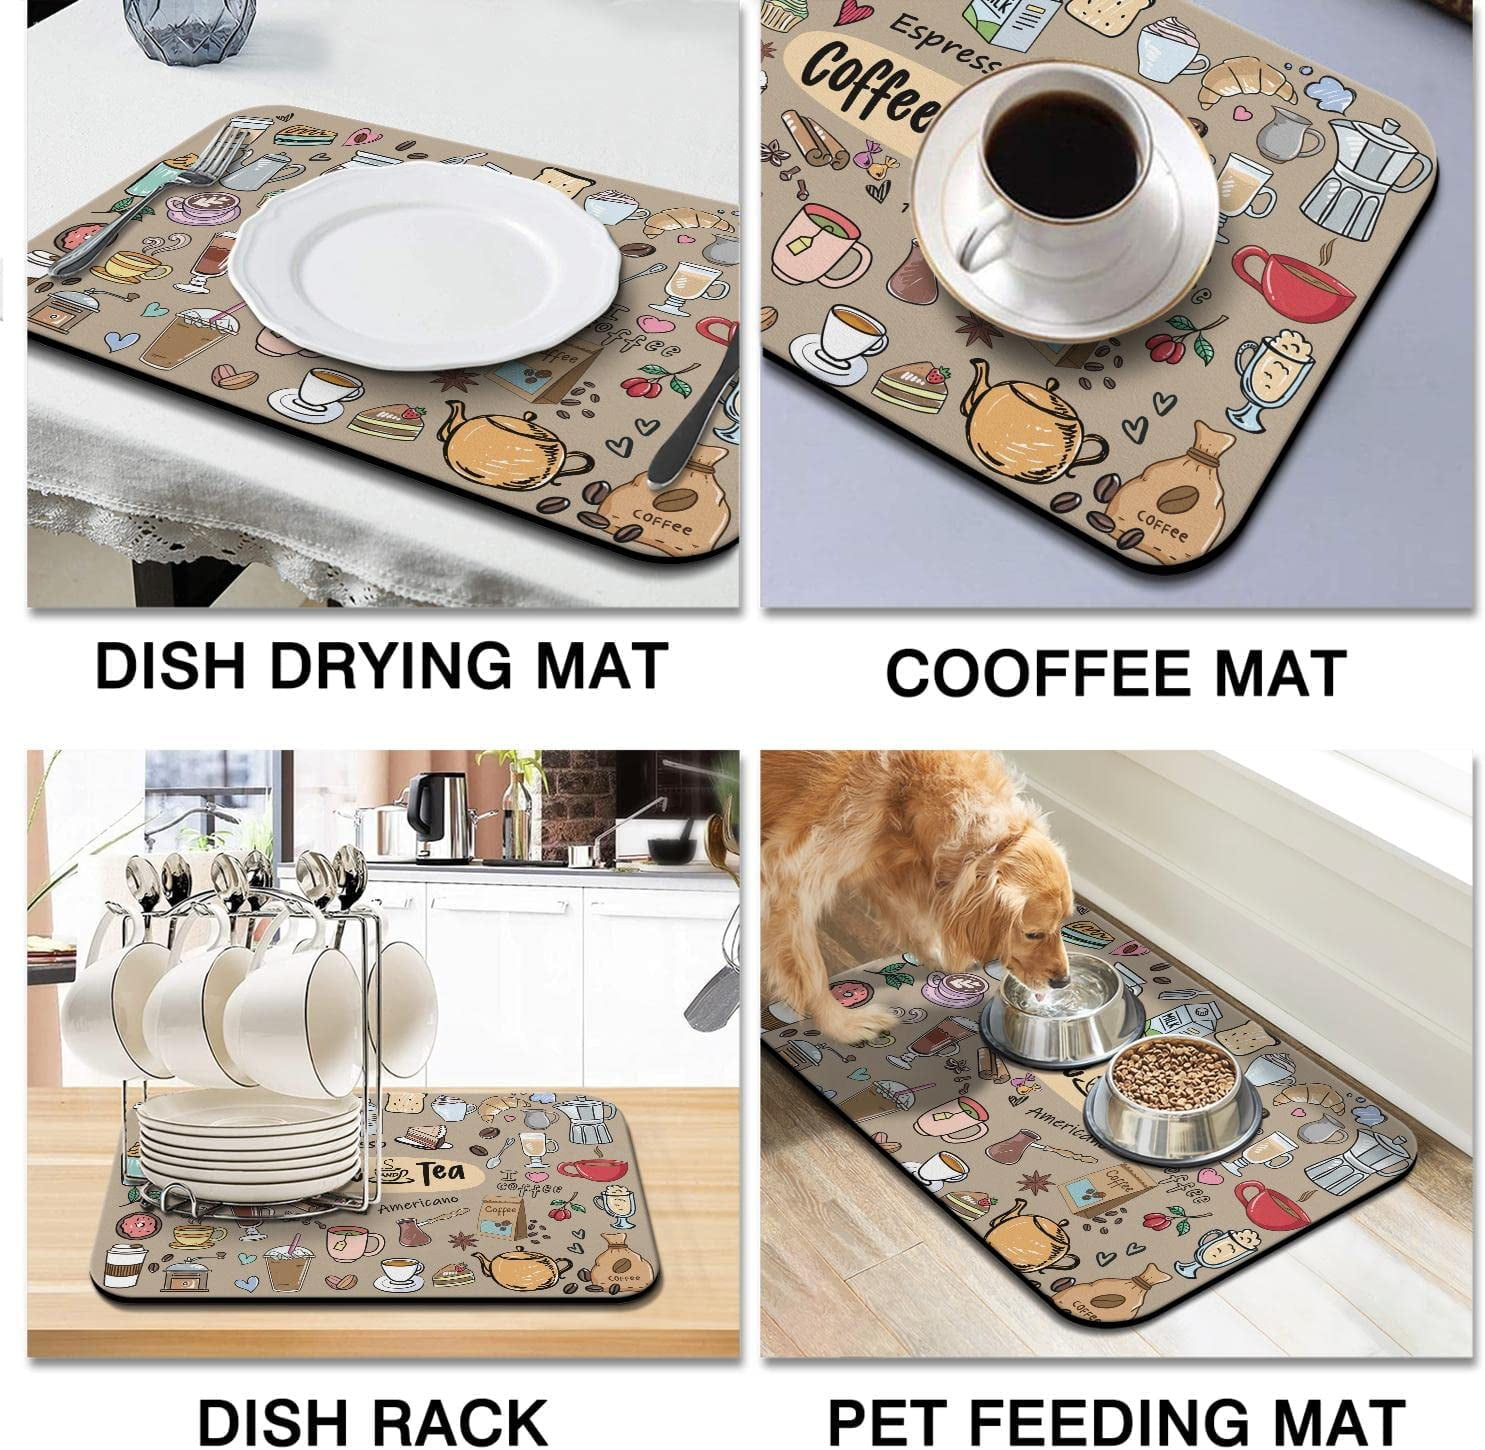  PoYang Coffee Mat: 17 X 31 Large Coffee Bar Mat with